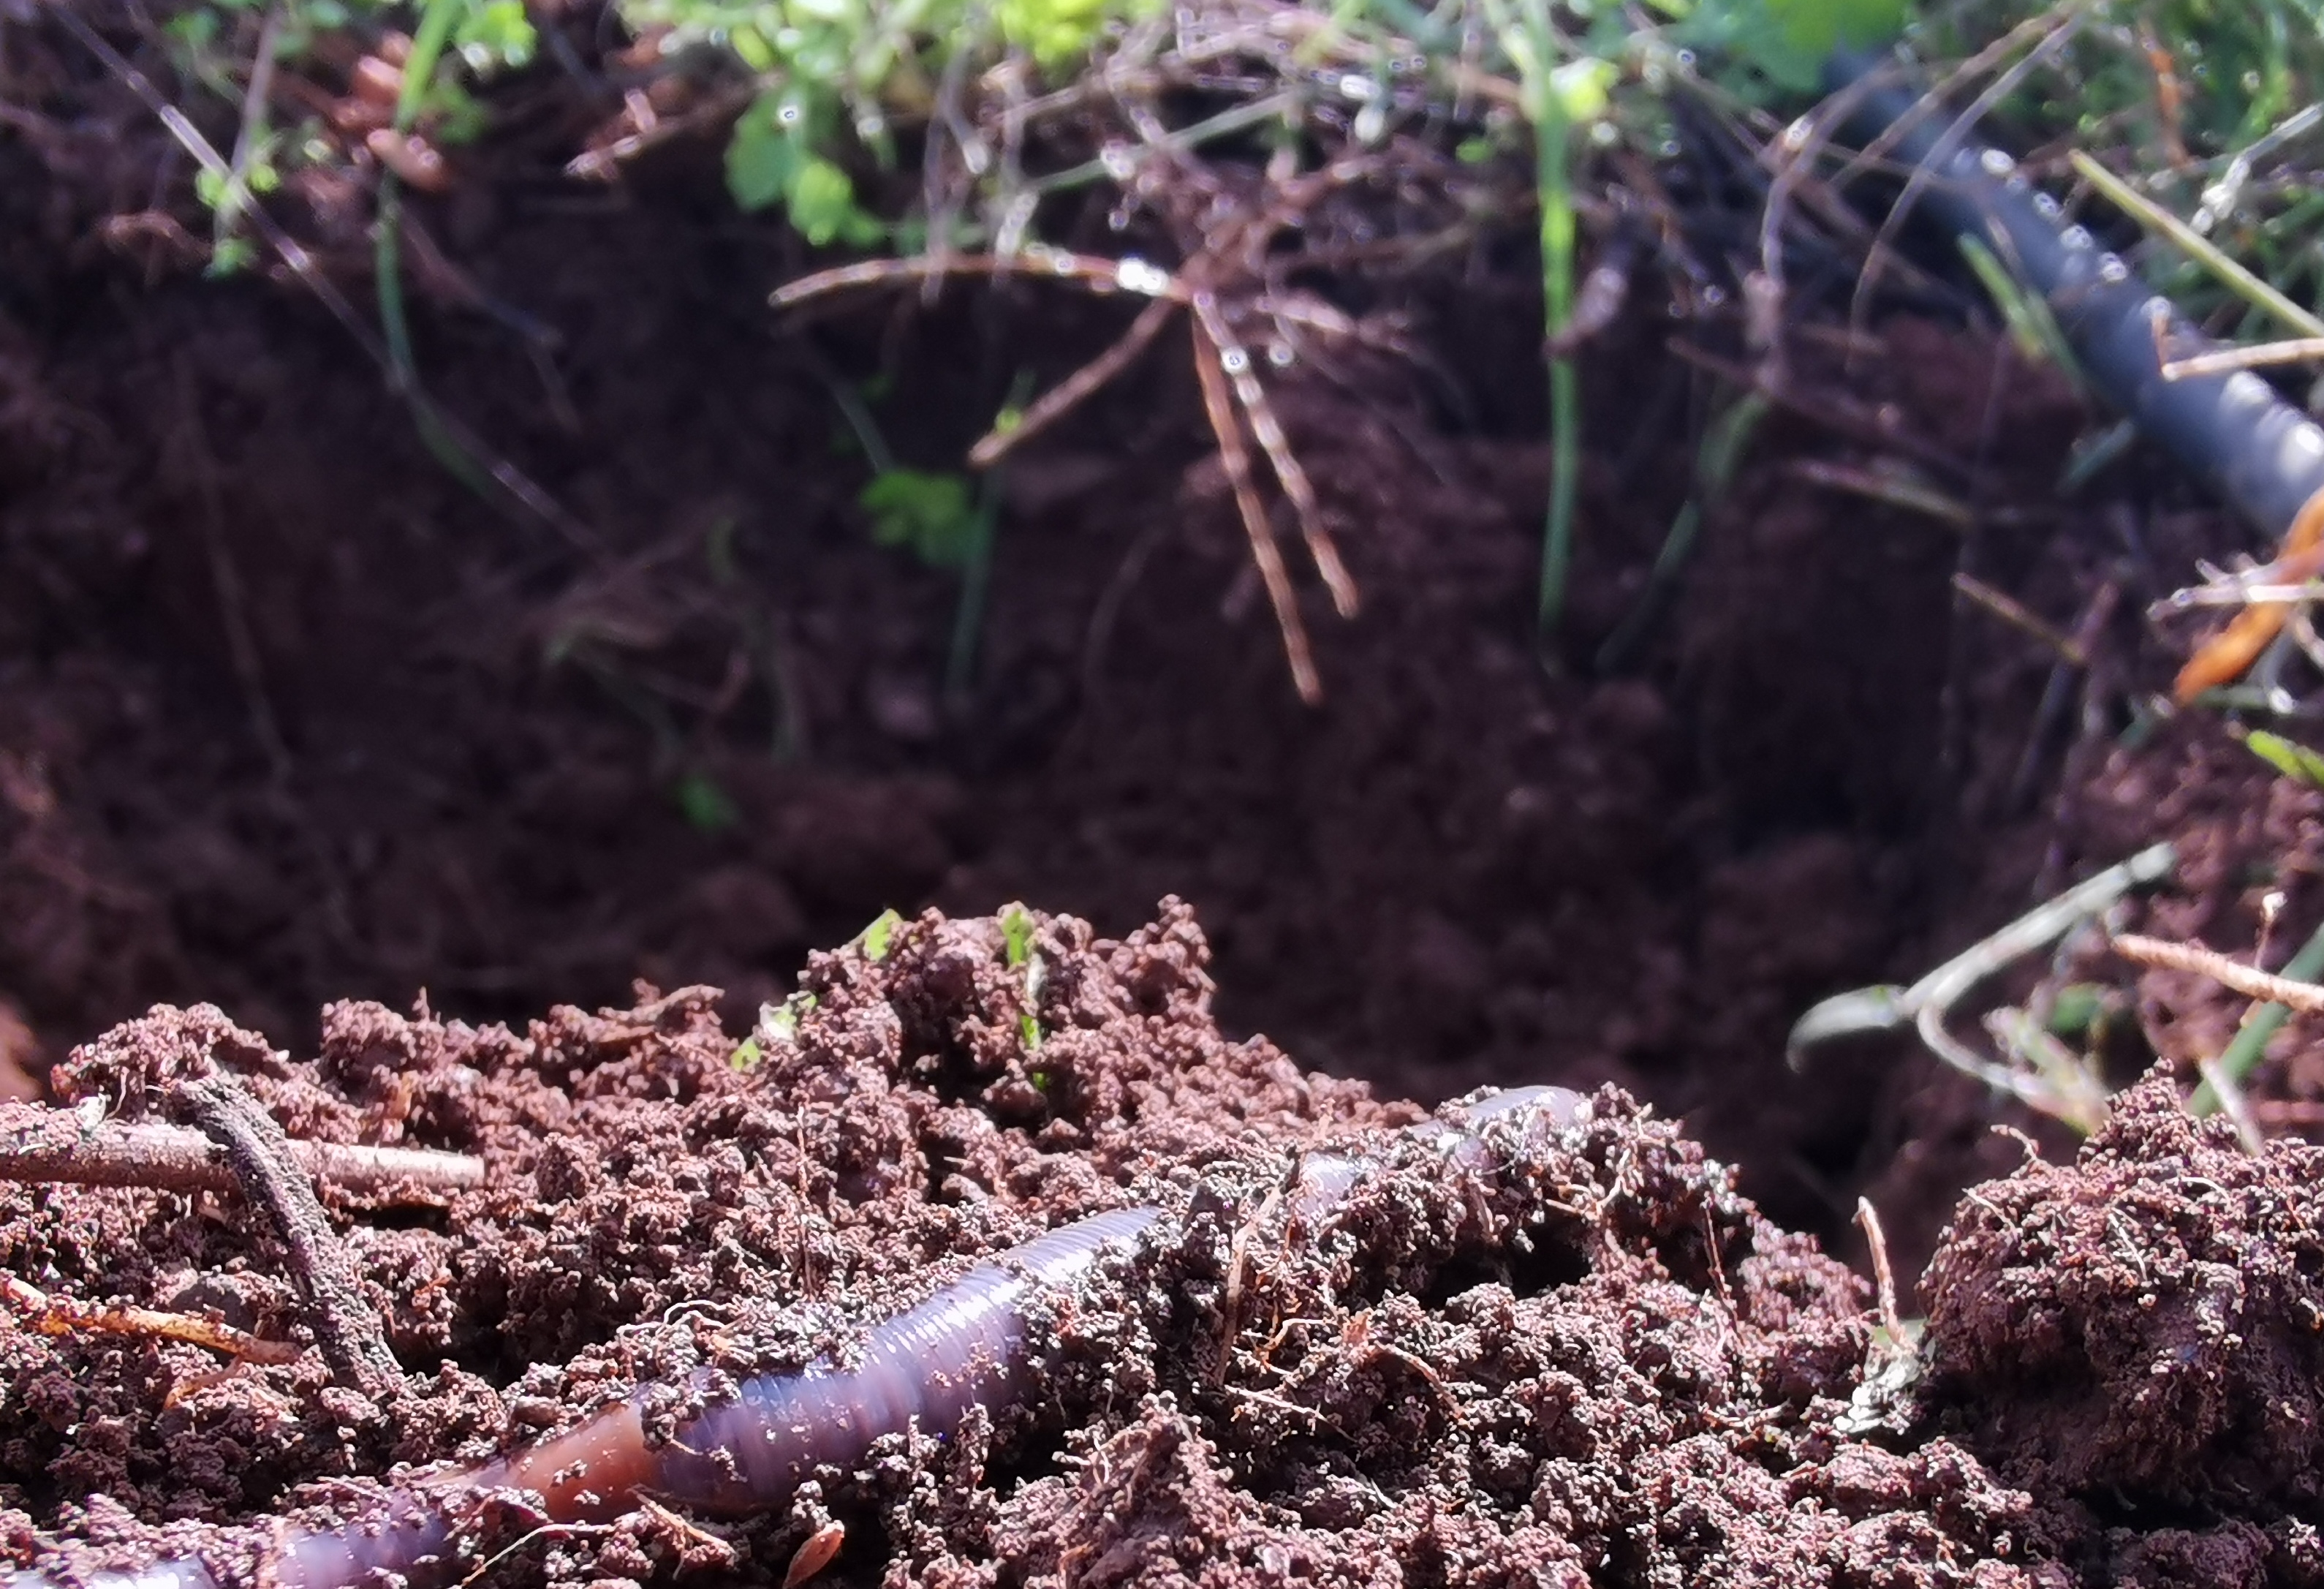 One of the earthworms that have been hard at work to improve the soil of the sweet potato field.